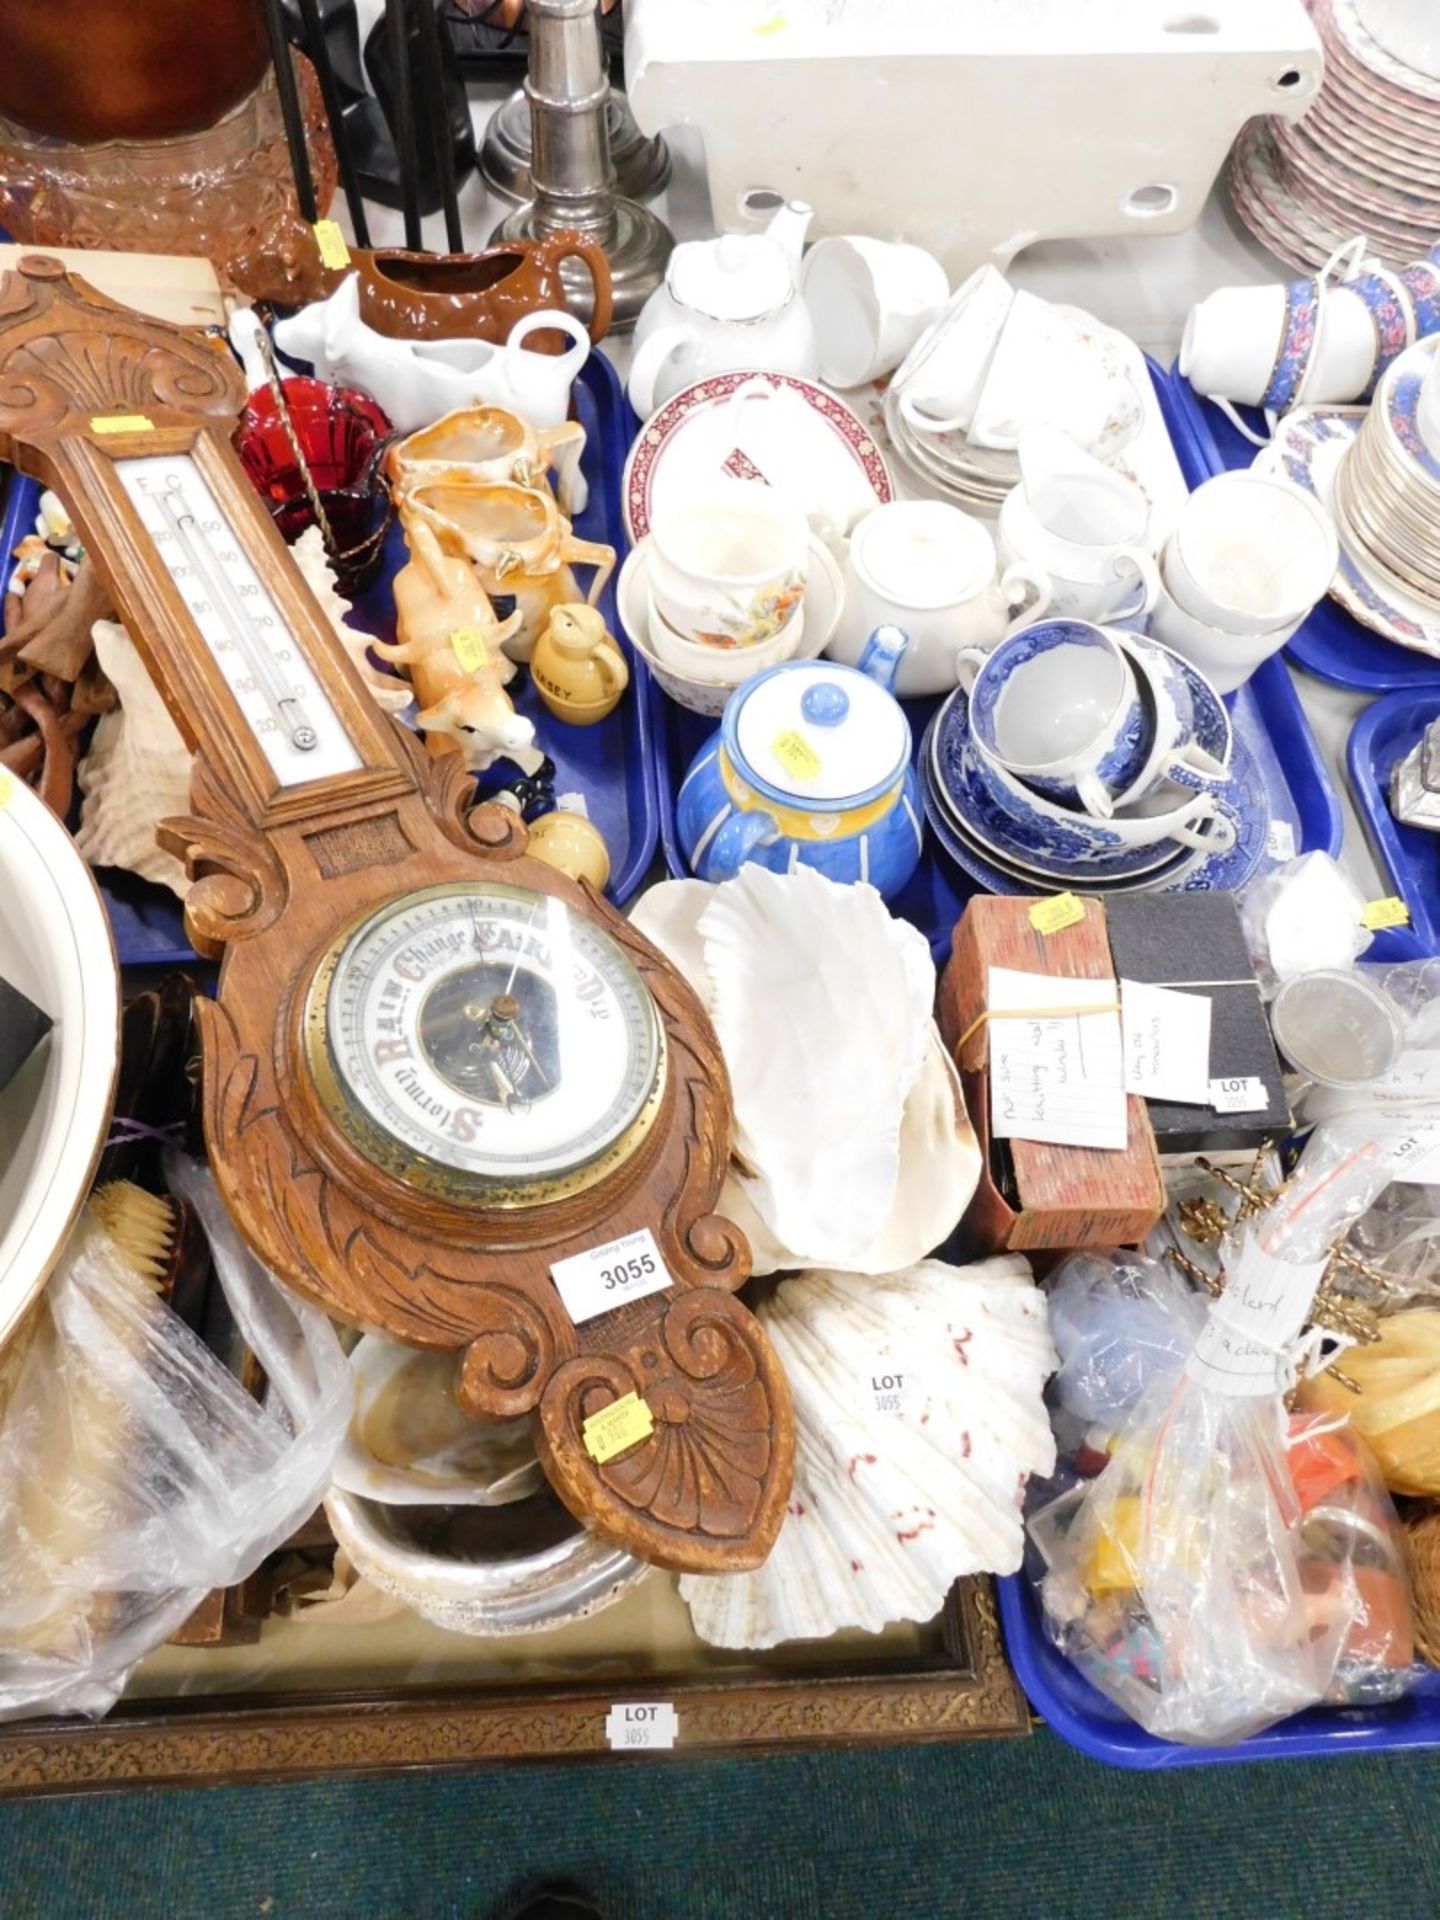 Household glassware and effects, china, pottery cow creamers, oak barometer, seashells. (2 trays and